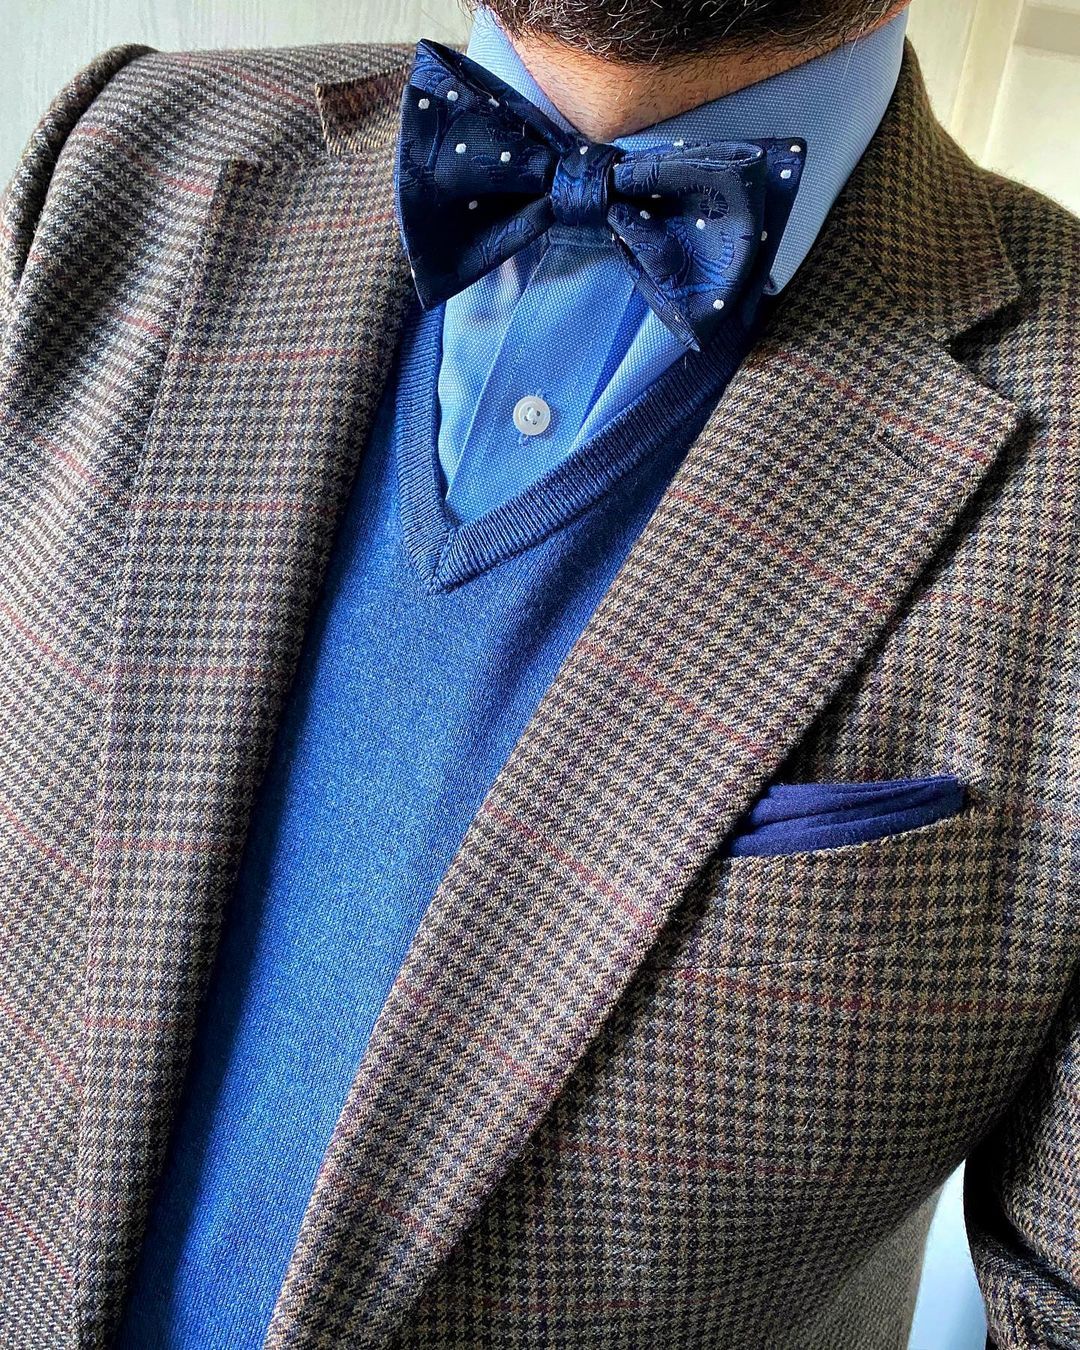 „Colours, like features, follow the changes of emotions“
(Pablo Picasso)
—
Friday again! To be more precise another #bowtiefriday - the words of Picasso describe exactly the way l choose my colour combinations. Sometimes you want to be on a safe...